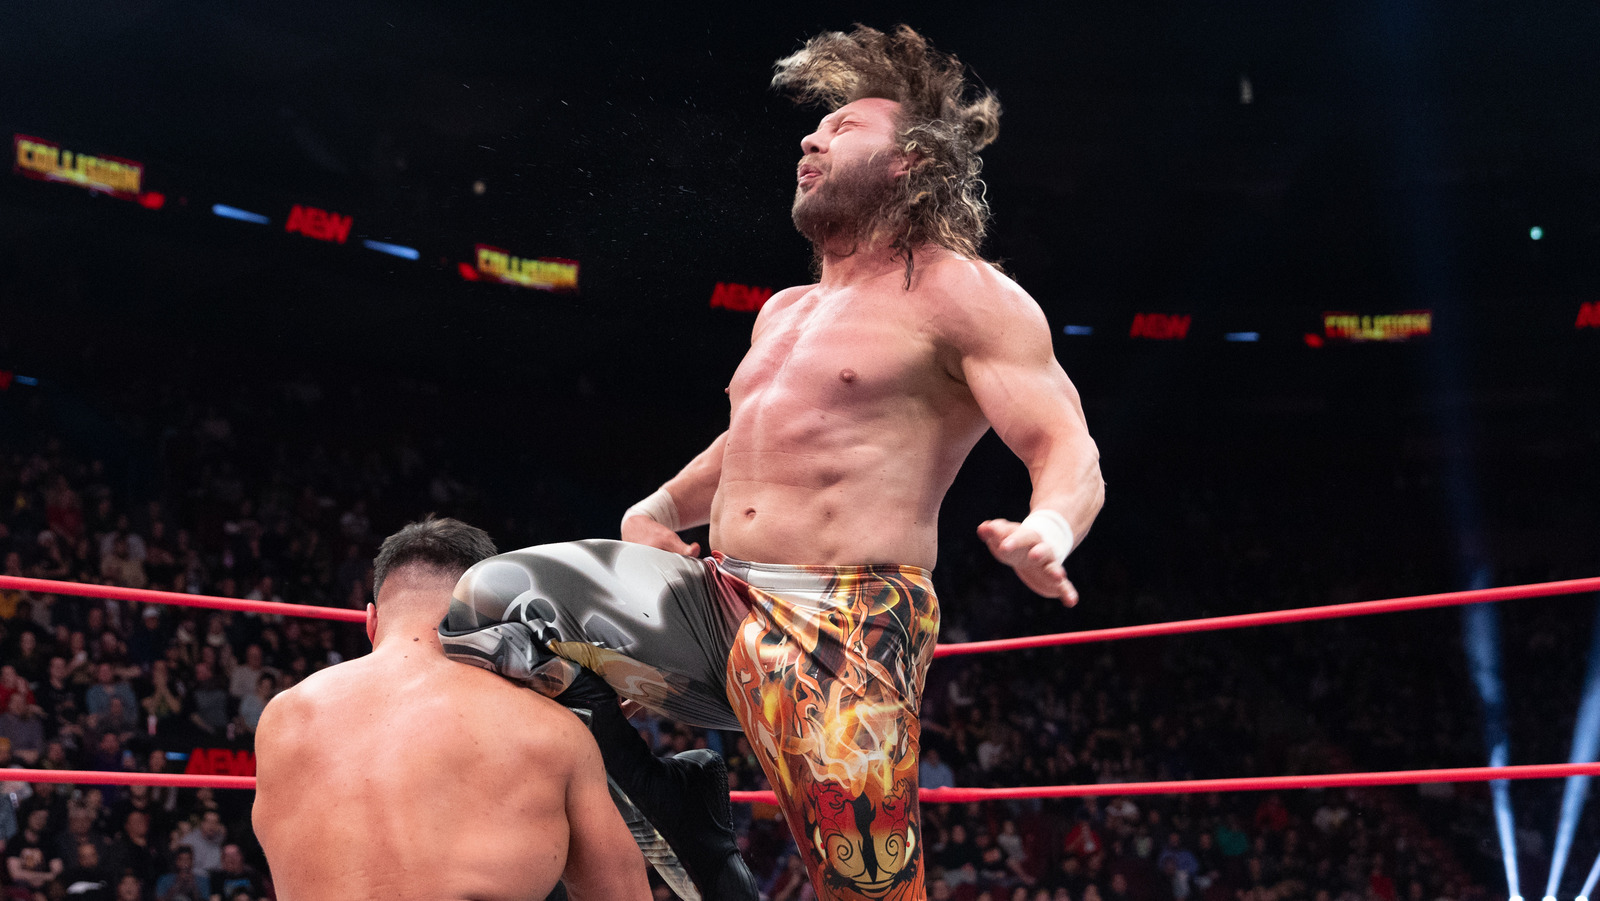 Backstage Update On The Status Of AEW Star Kenny Omega